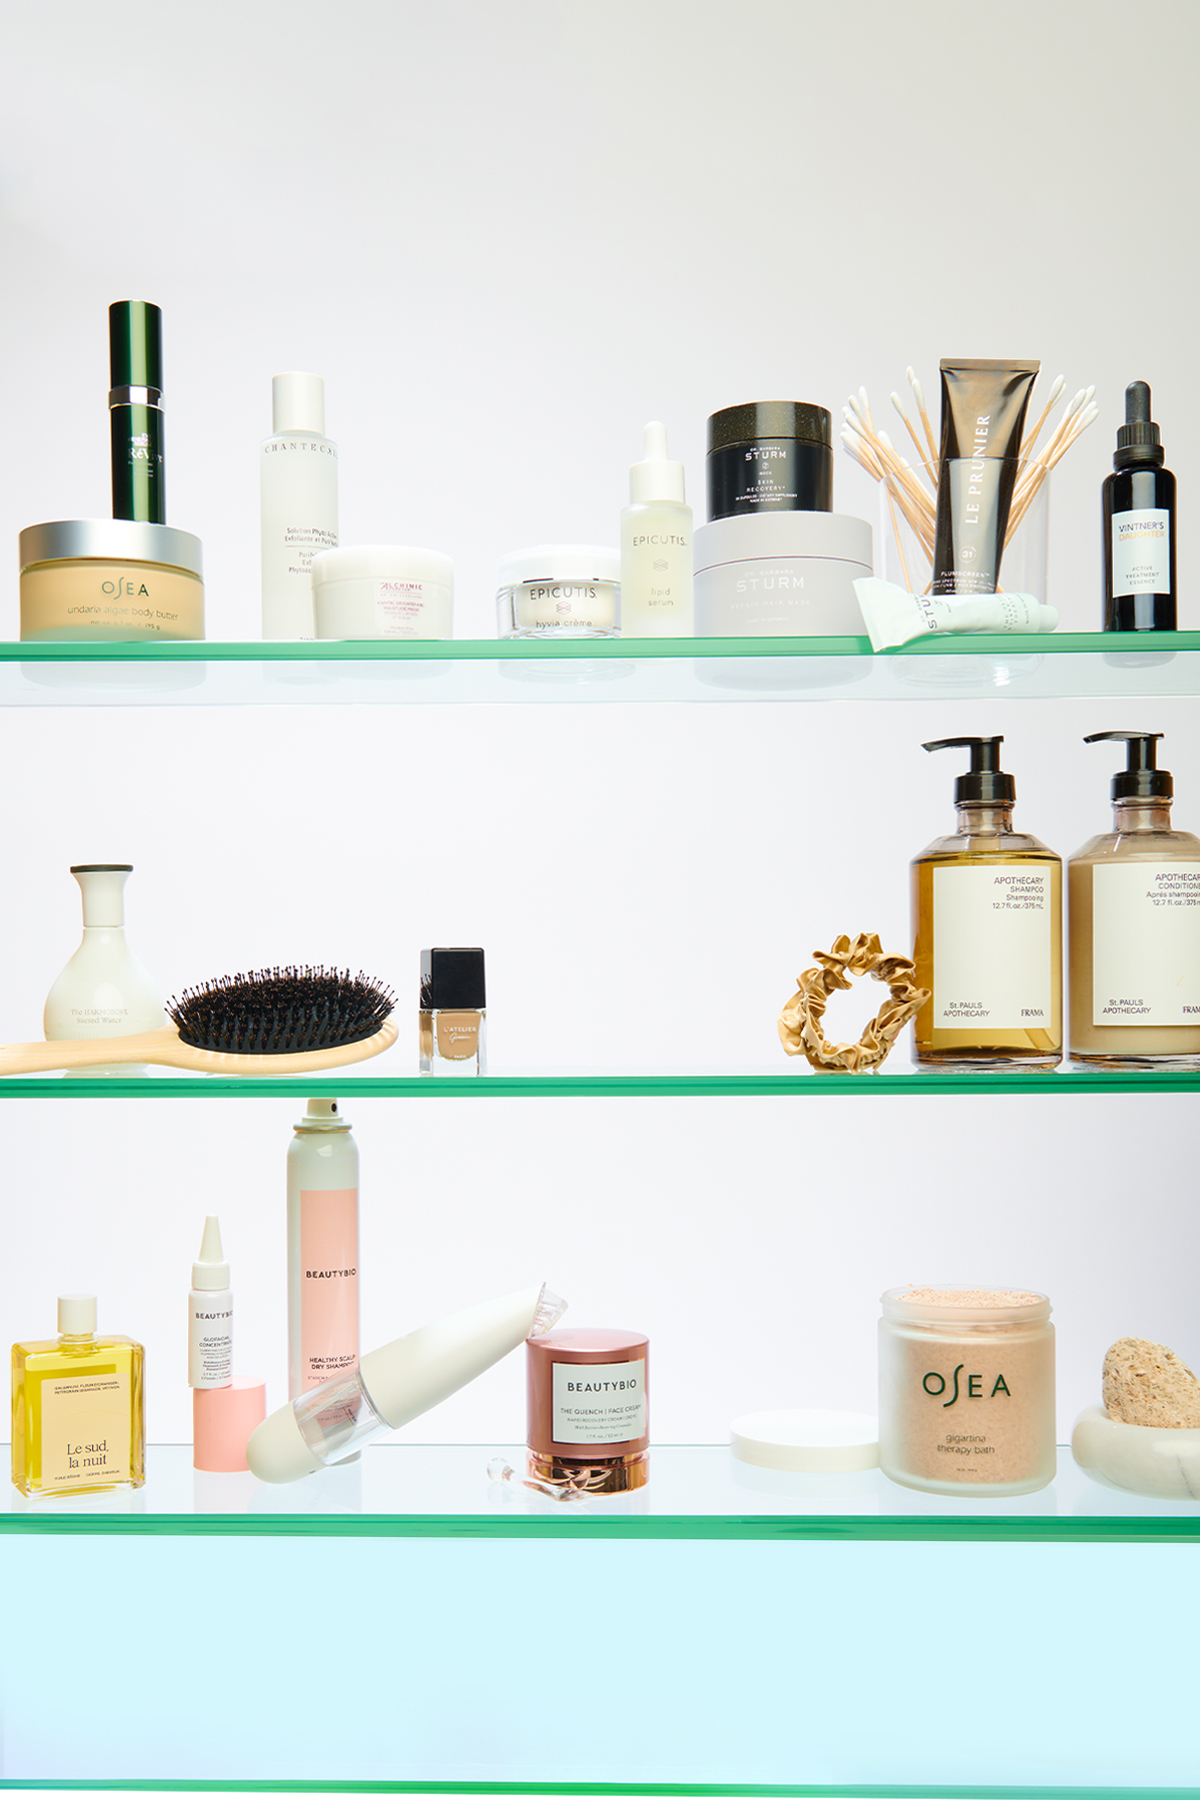 Beauty Bio Imagery of Beauty Products